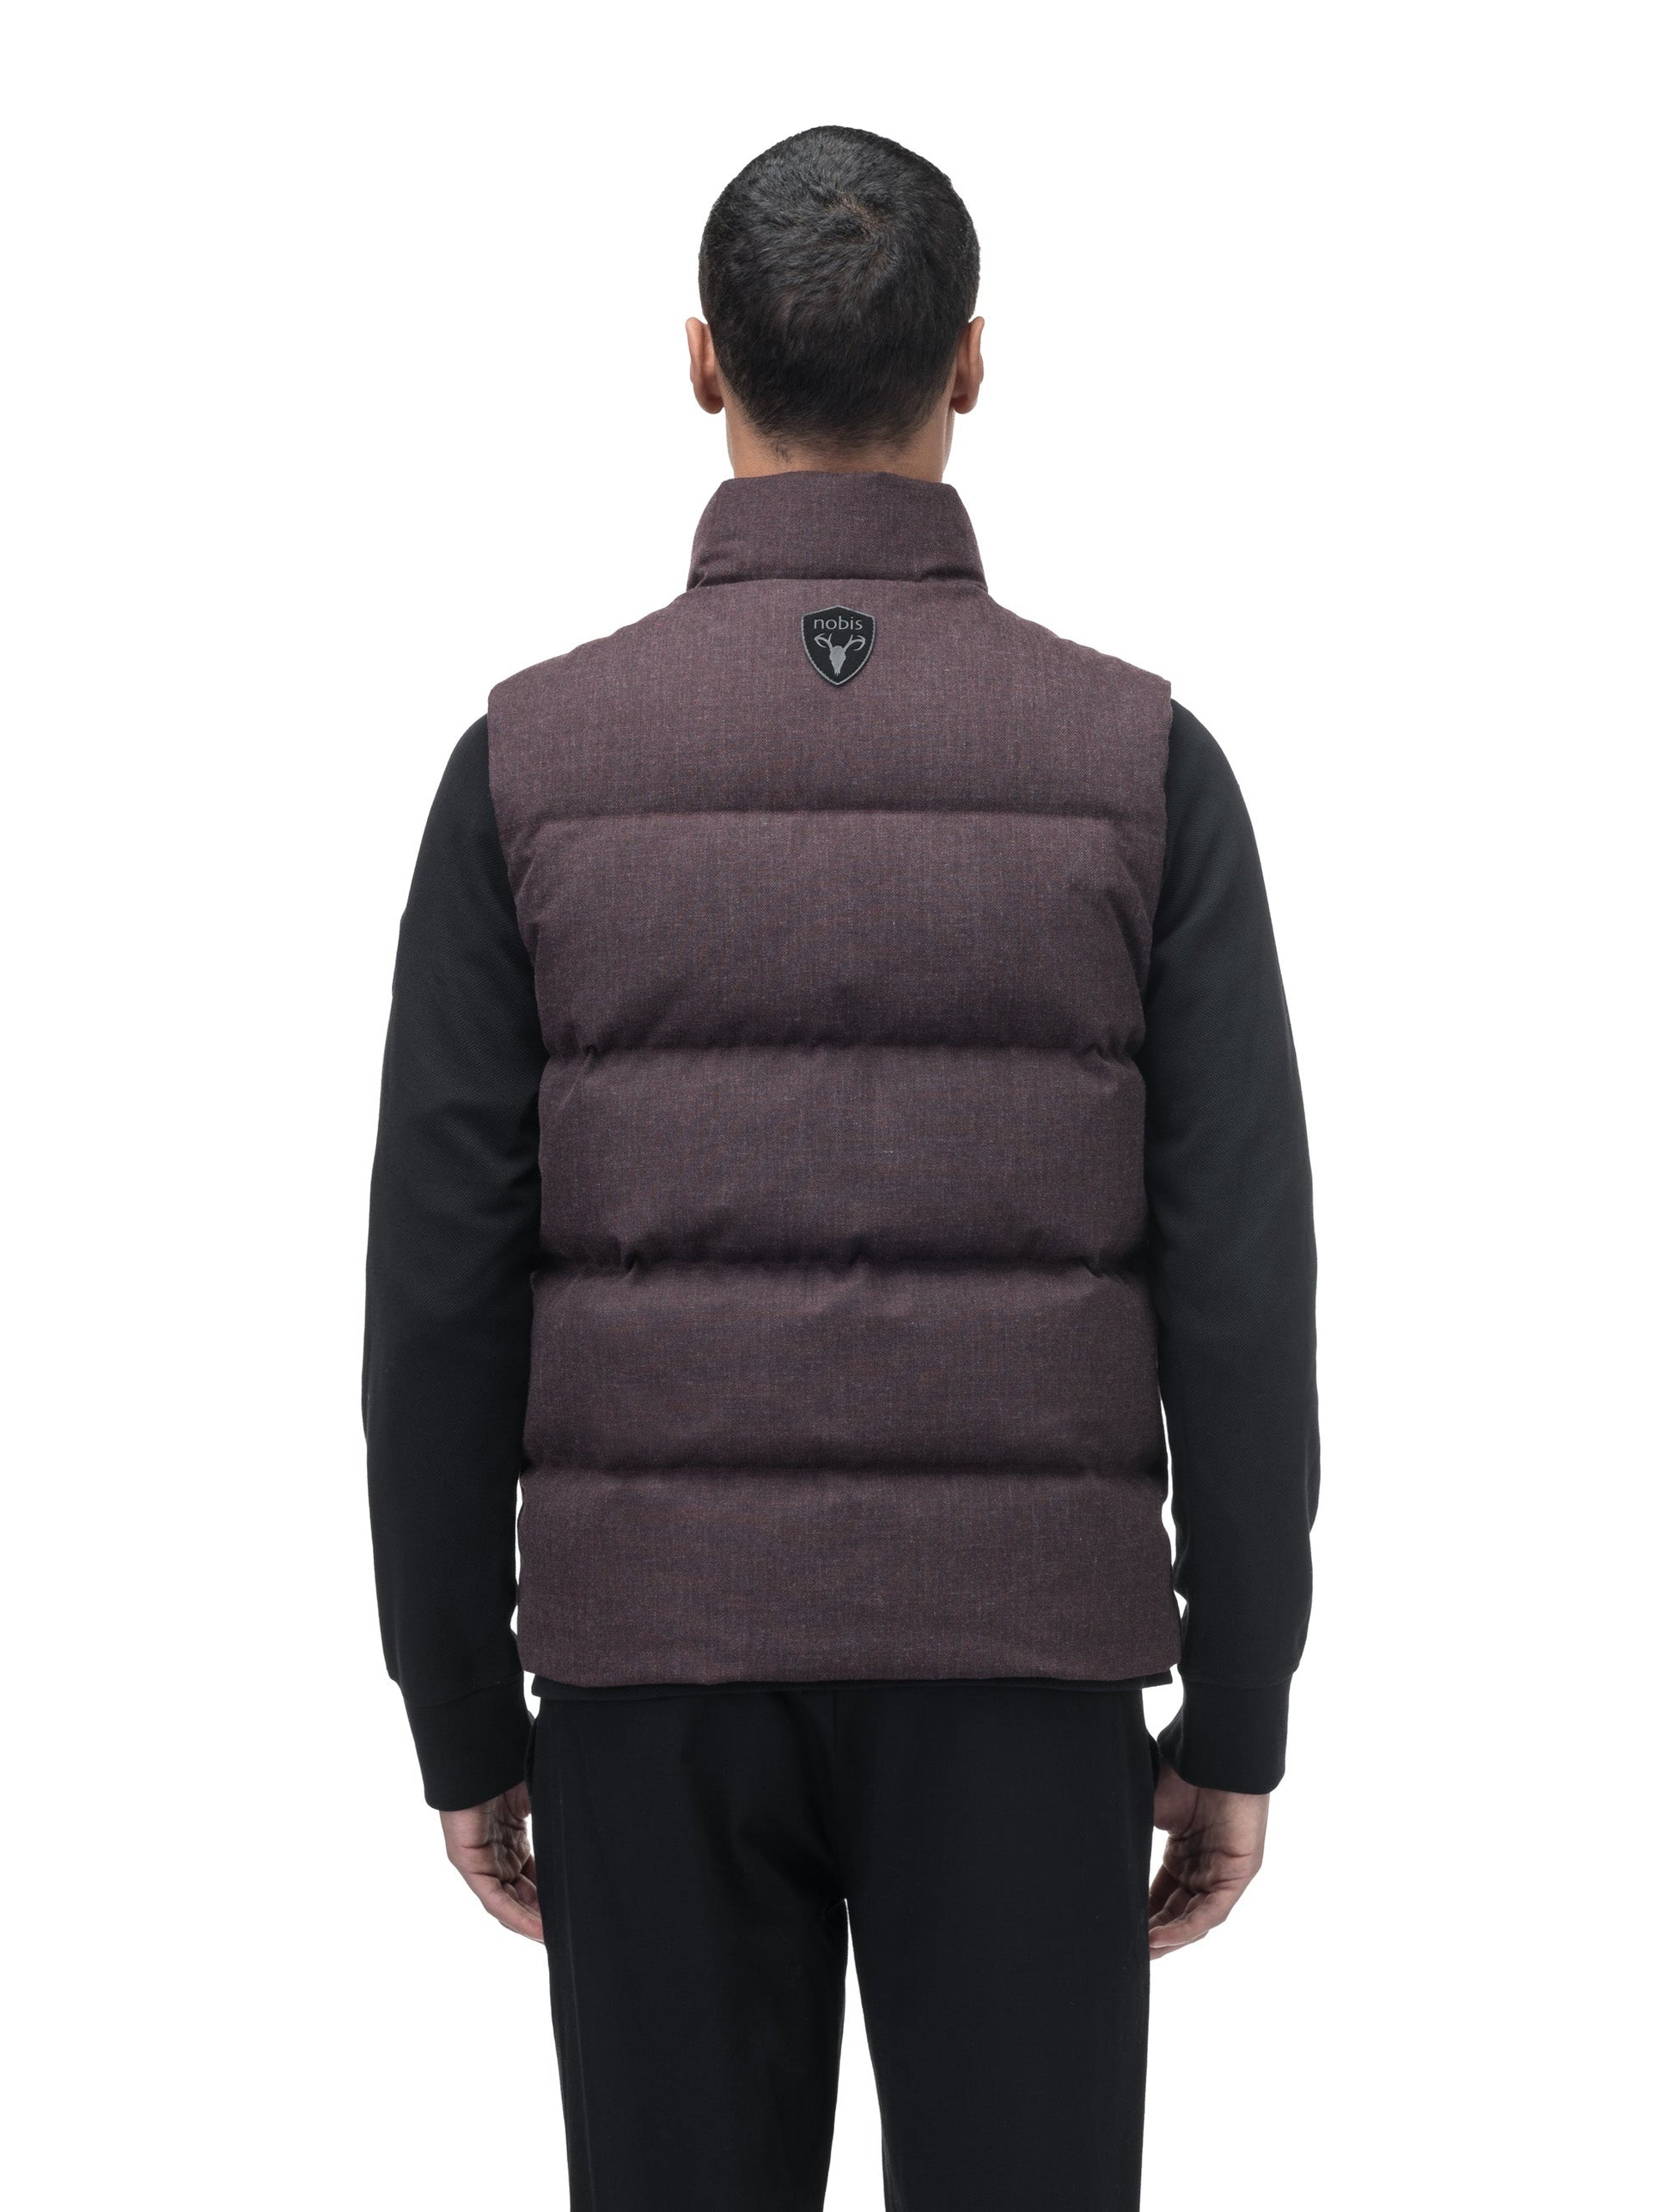 Vale Men's Quilted Vest in hip length, Canadian duck down insulation, and two-way zipper, in H. Burgundy